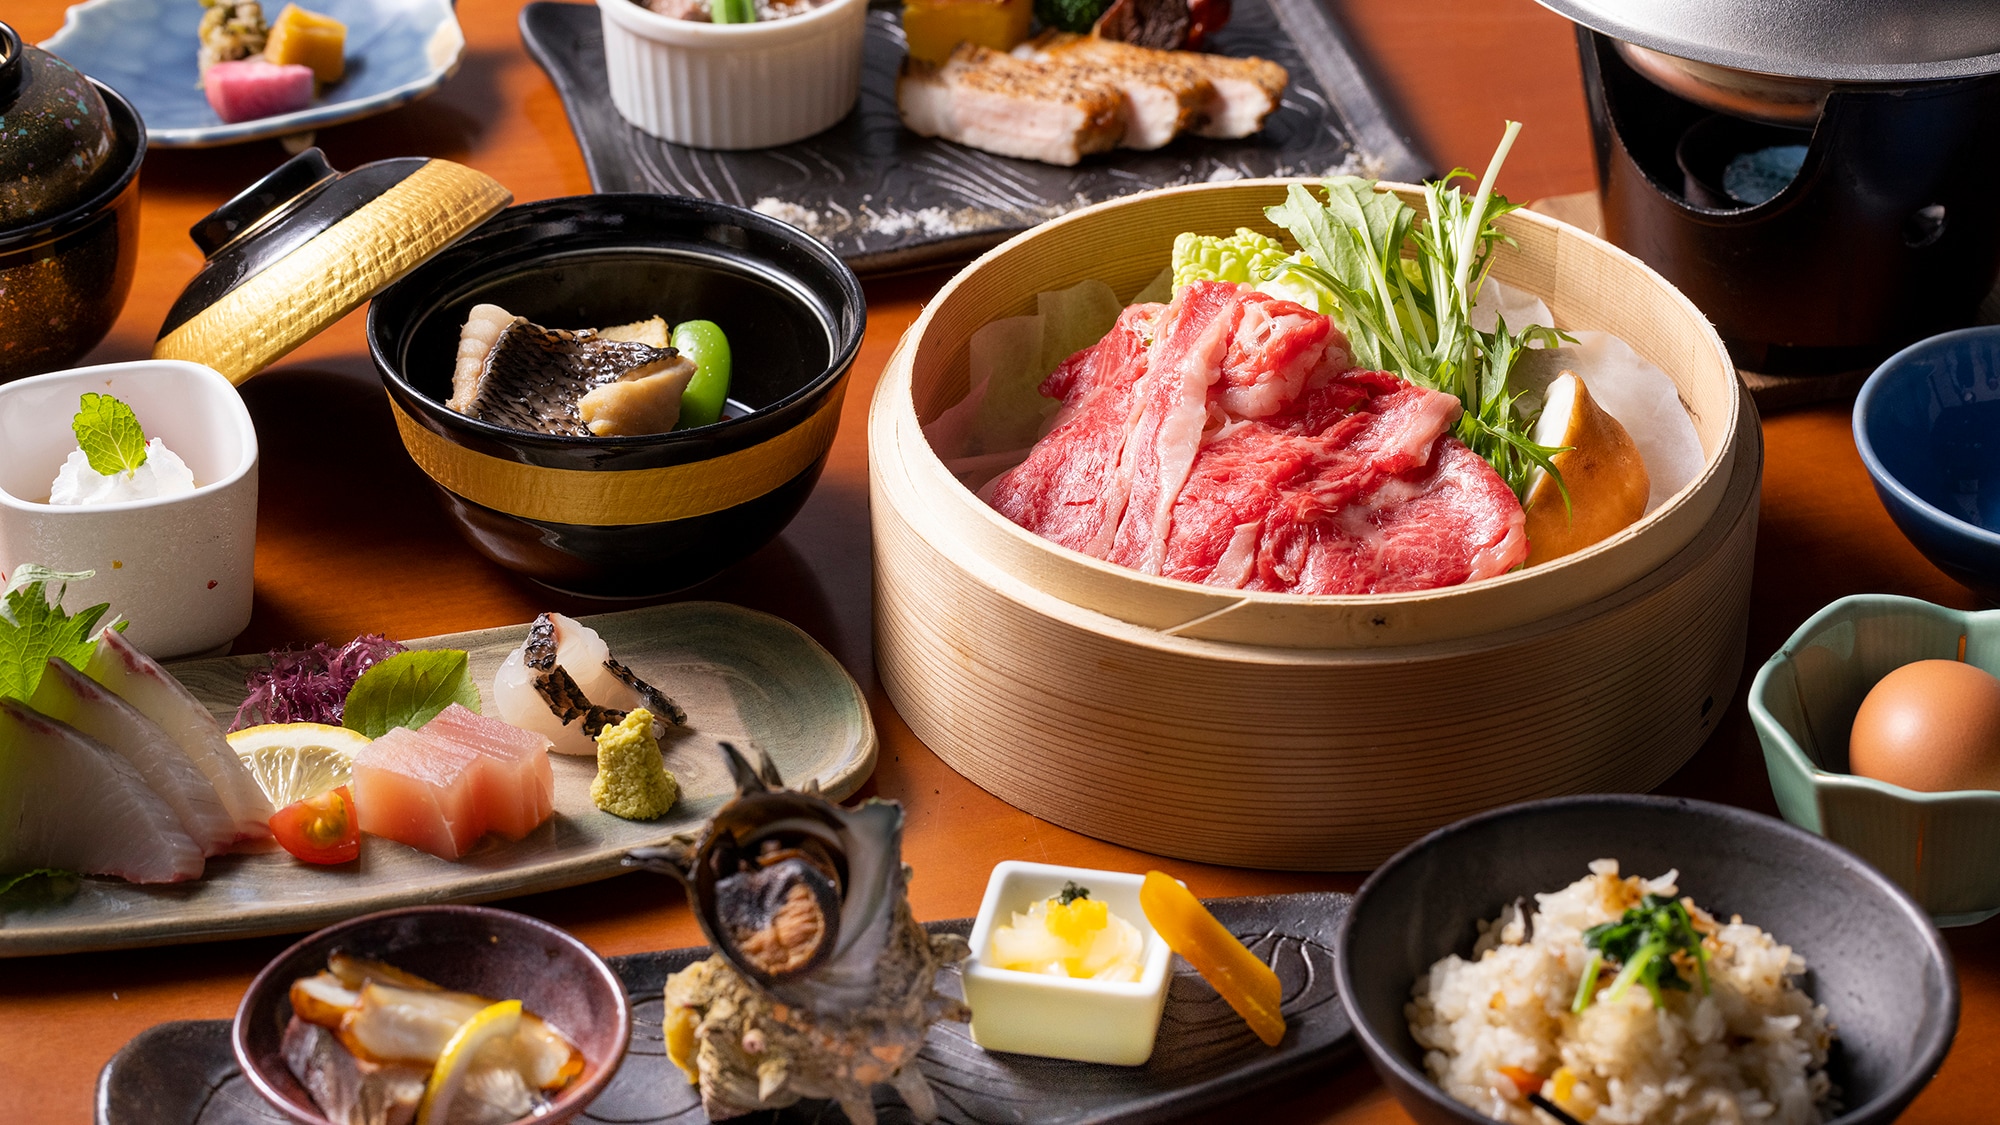 [Grade up] The main course is "Wagyu beef sukiyaki" and "Goto's local fish platter".